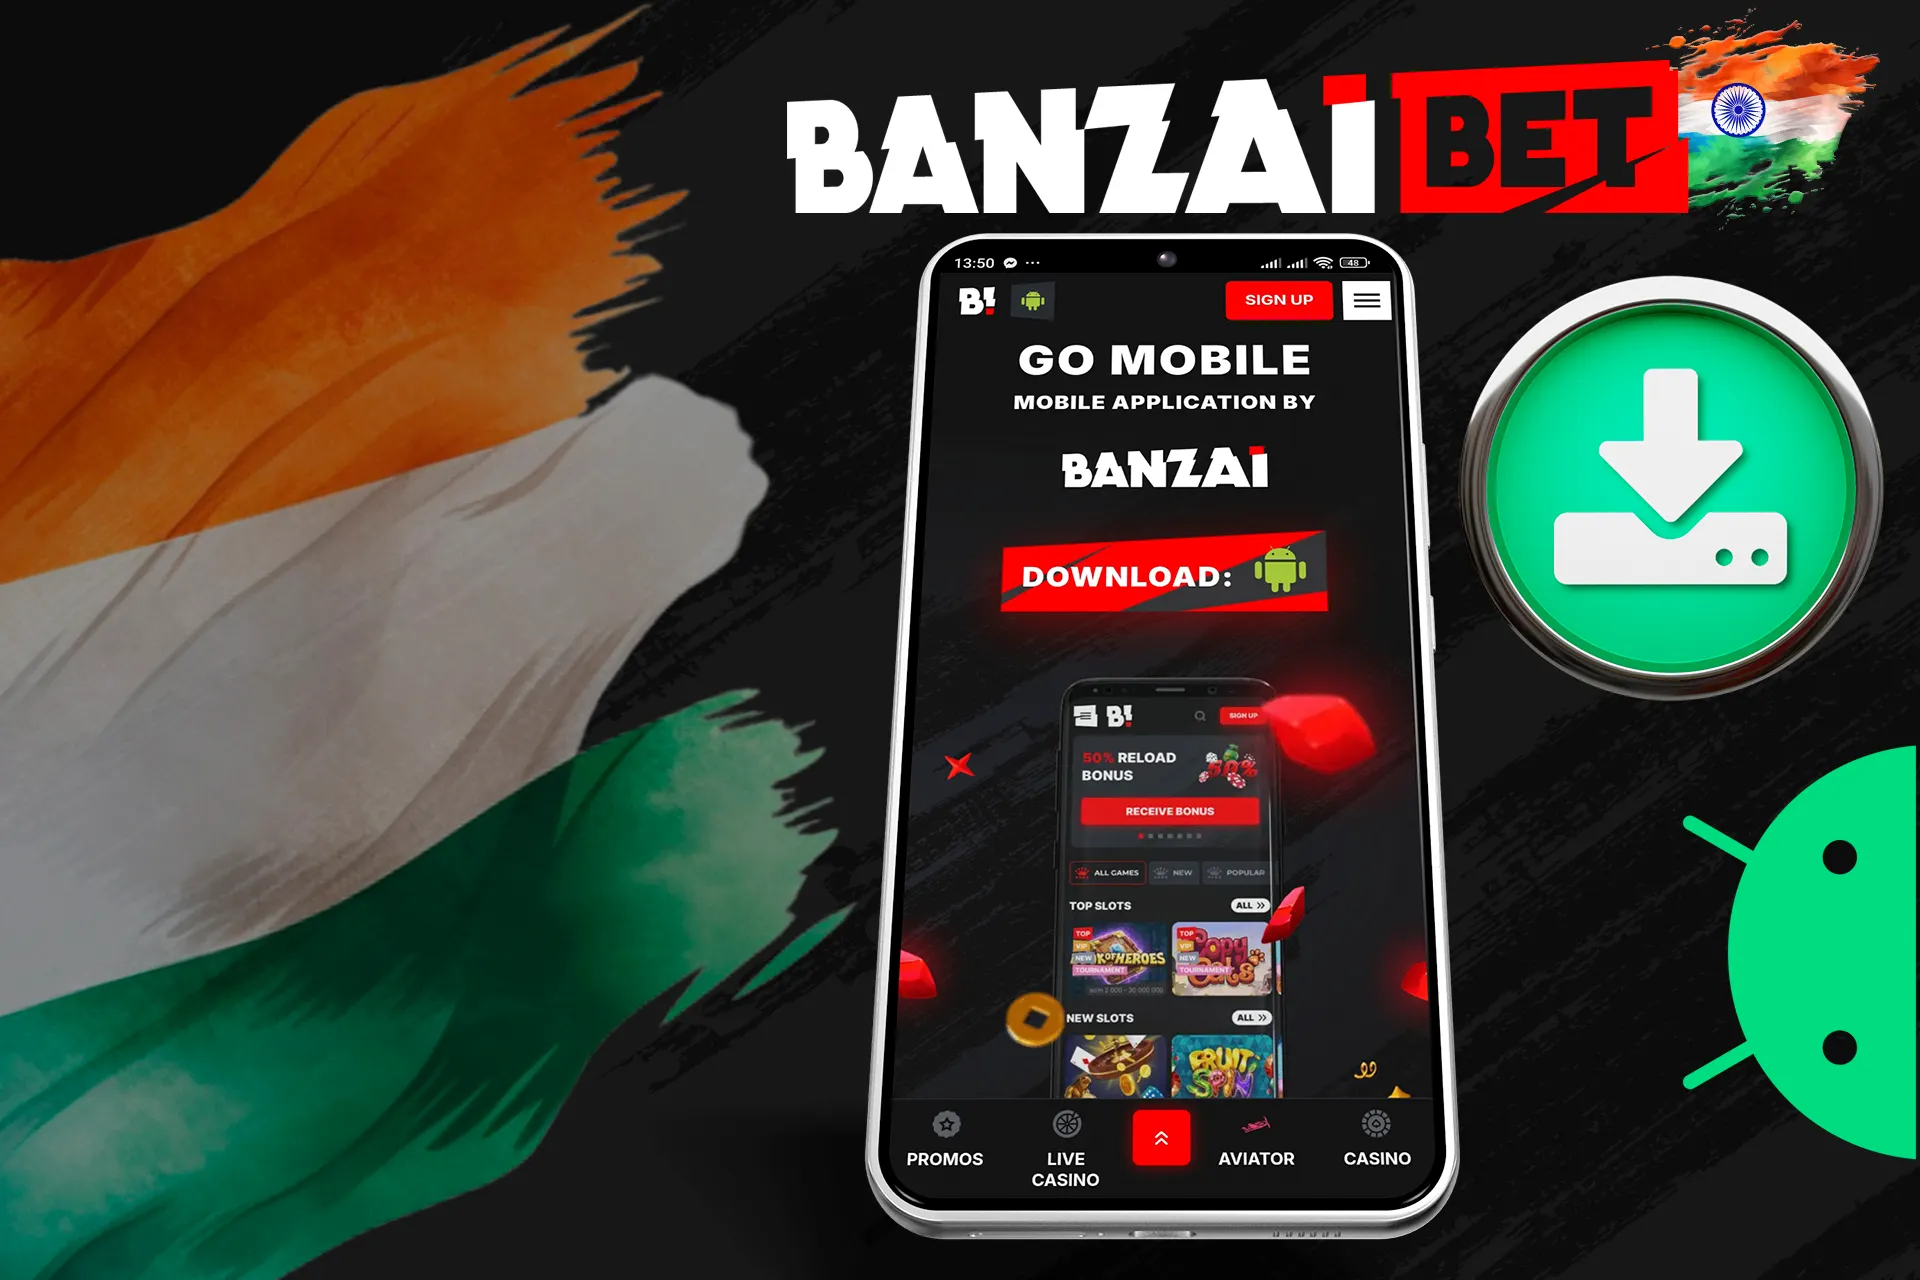 Install the Banzaibet mobile application on Android